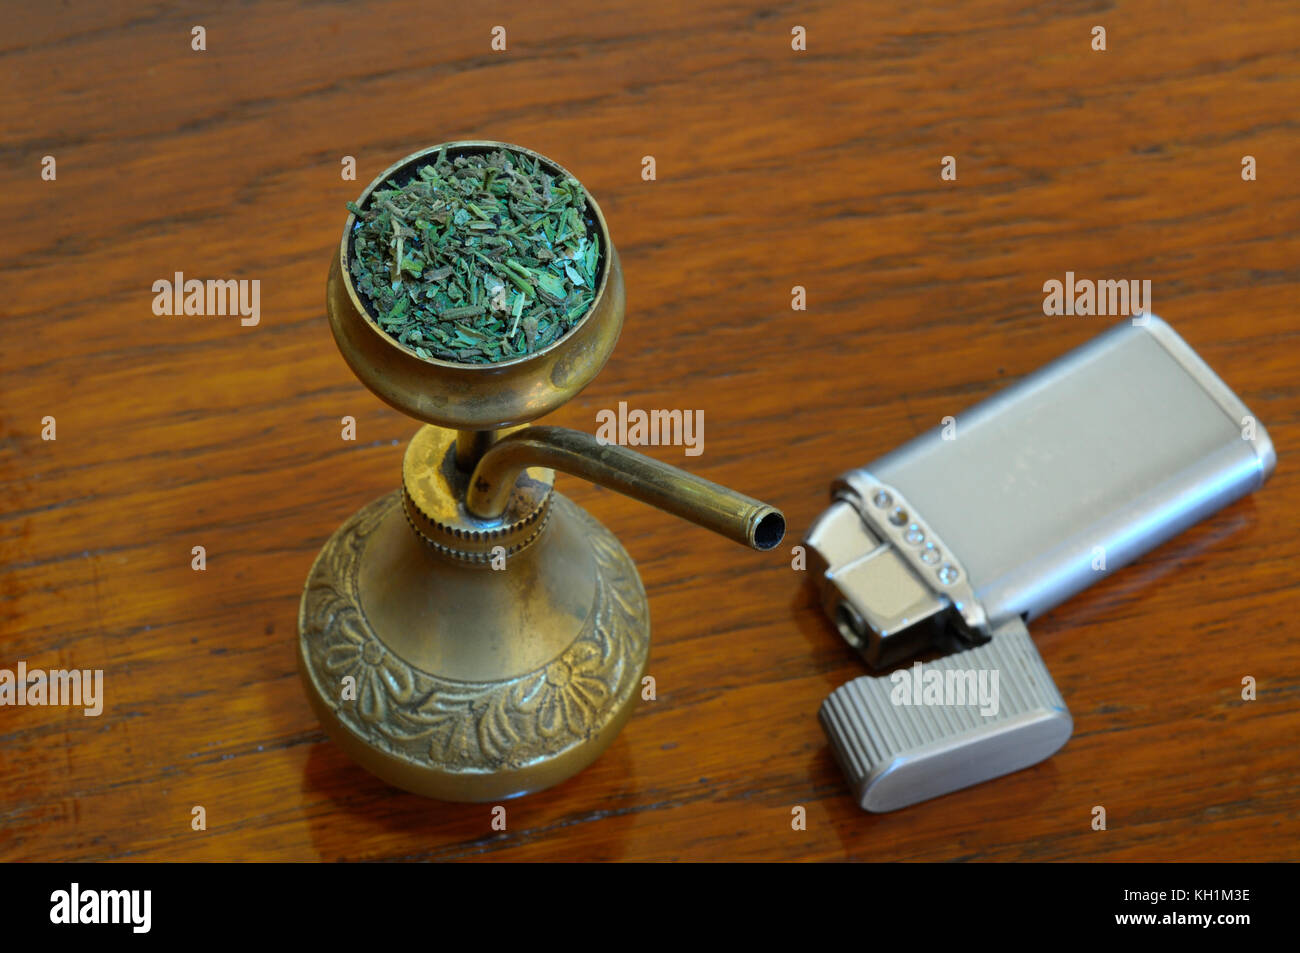 An old metal lighter and a brass bong with marijuana on it - placed on  wooden surface Stock Photo - Alamy